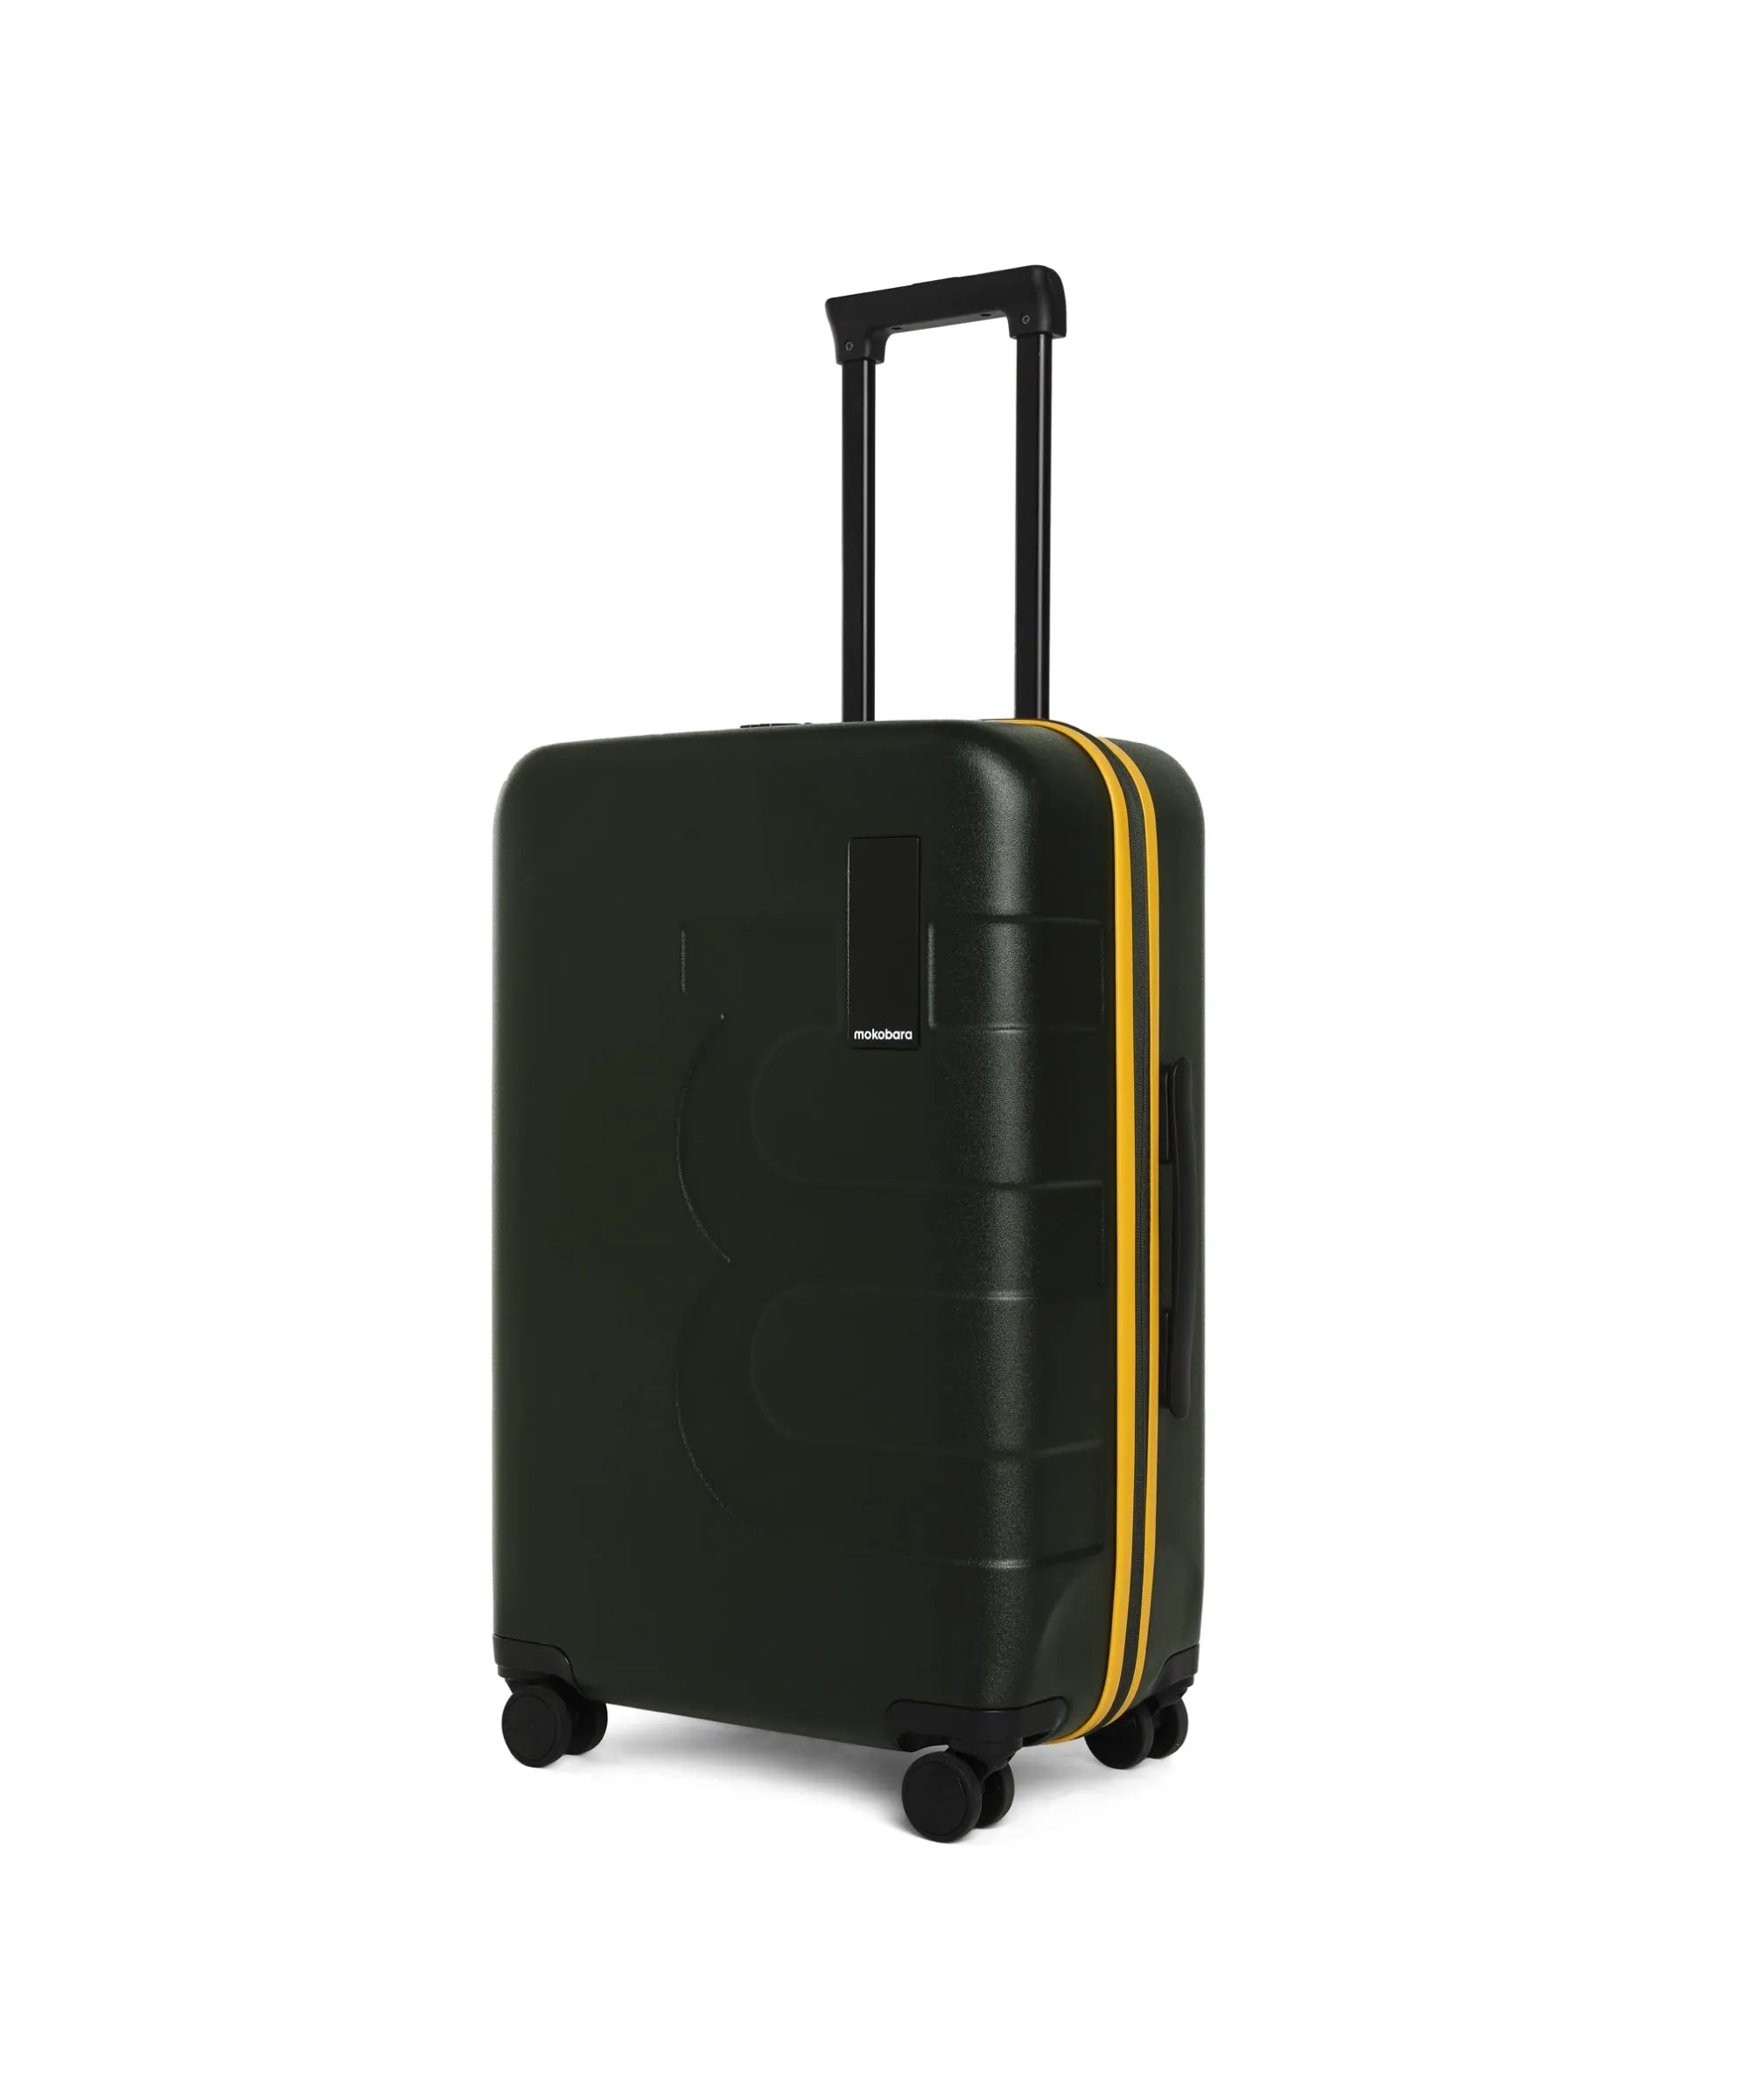 Color_4AM Forest Sunray (Limited Edition) | The Em Check-In Luggage